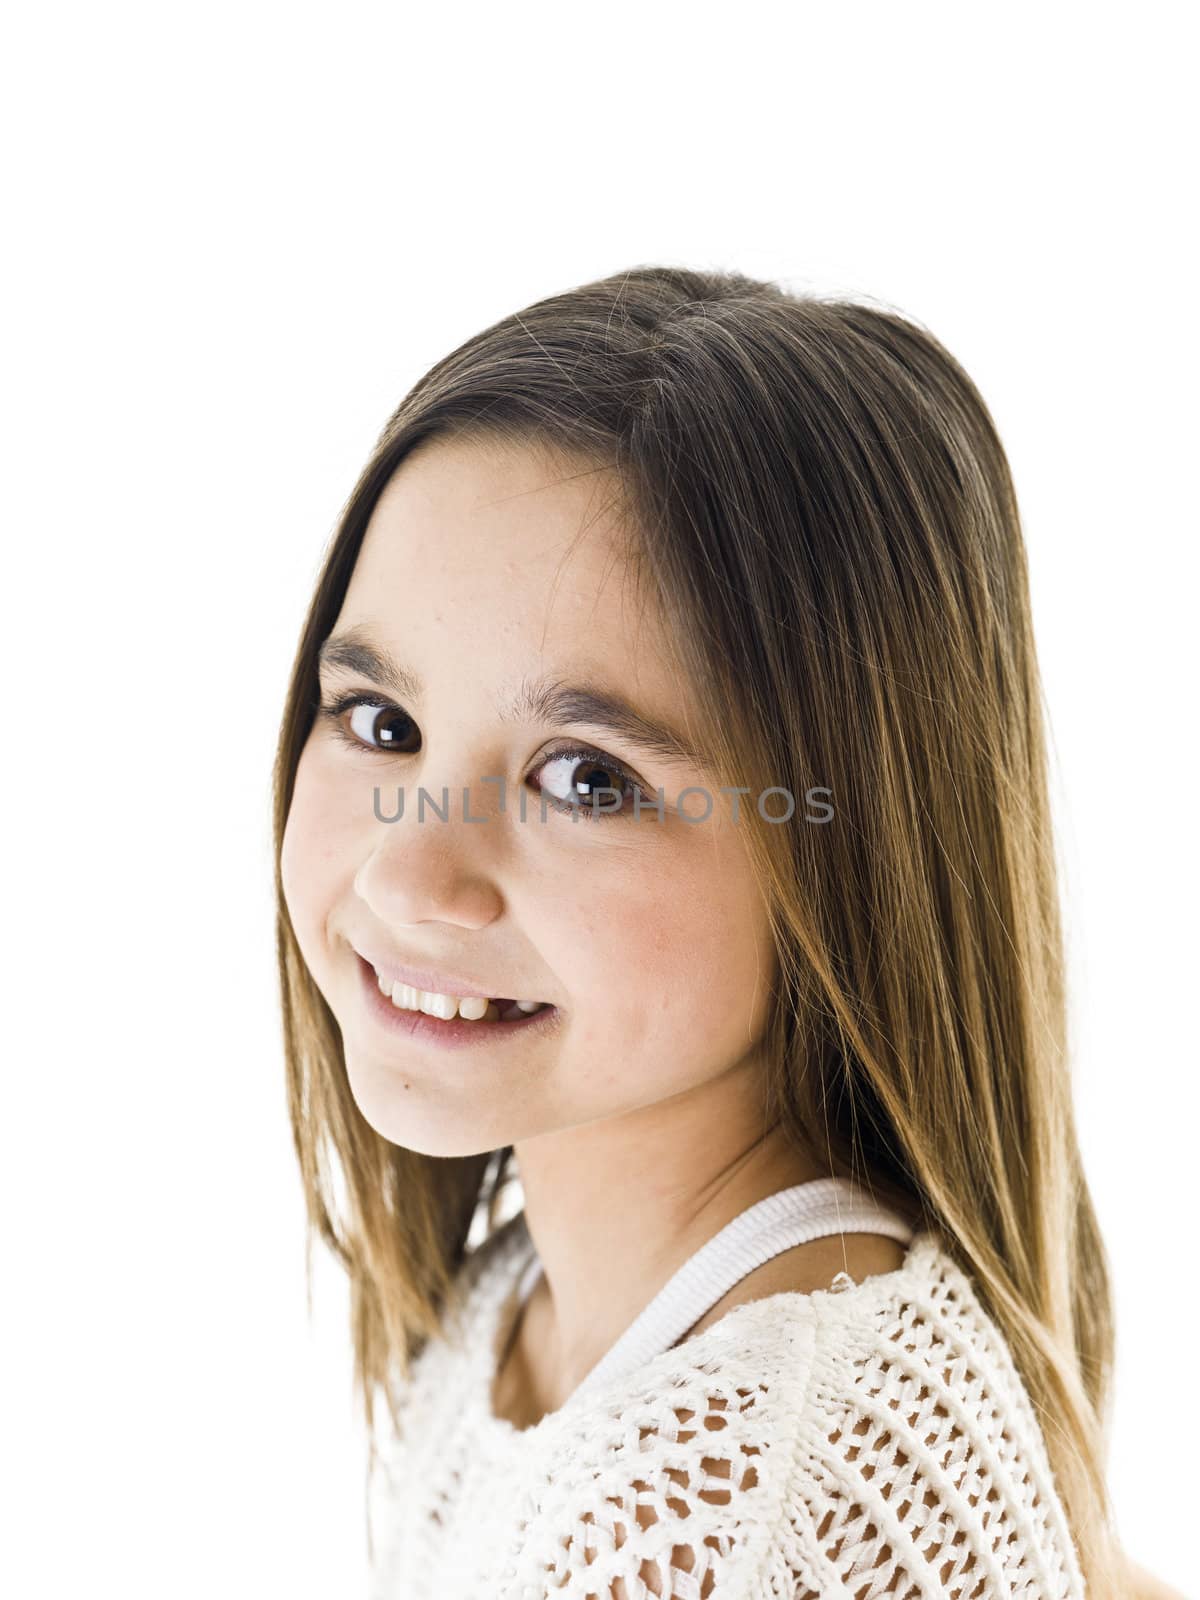 Young Girl Portrait by gemenacom